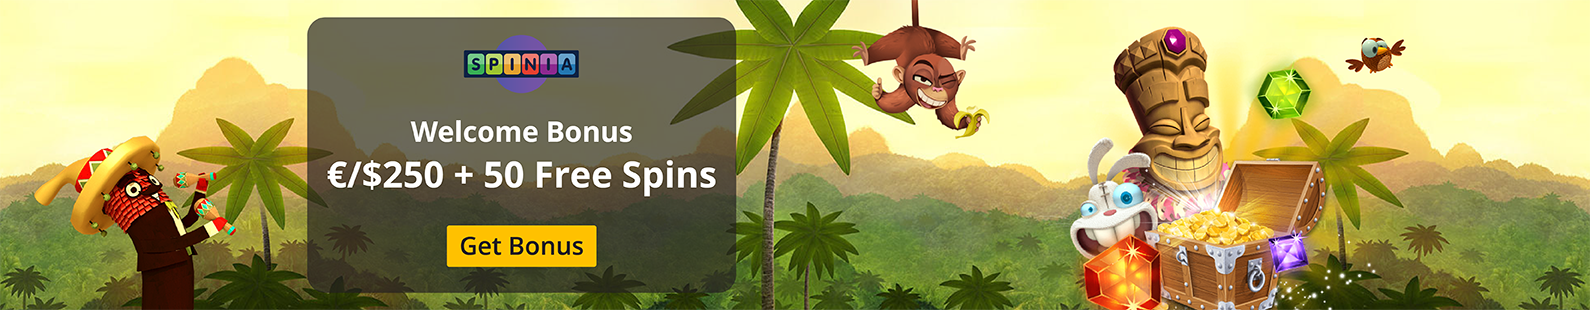 Spinia Casino: 100% Welcome Bonus up to €/$250 plus 50 Free Spins